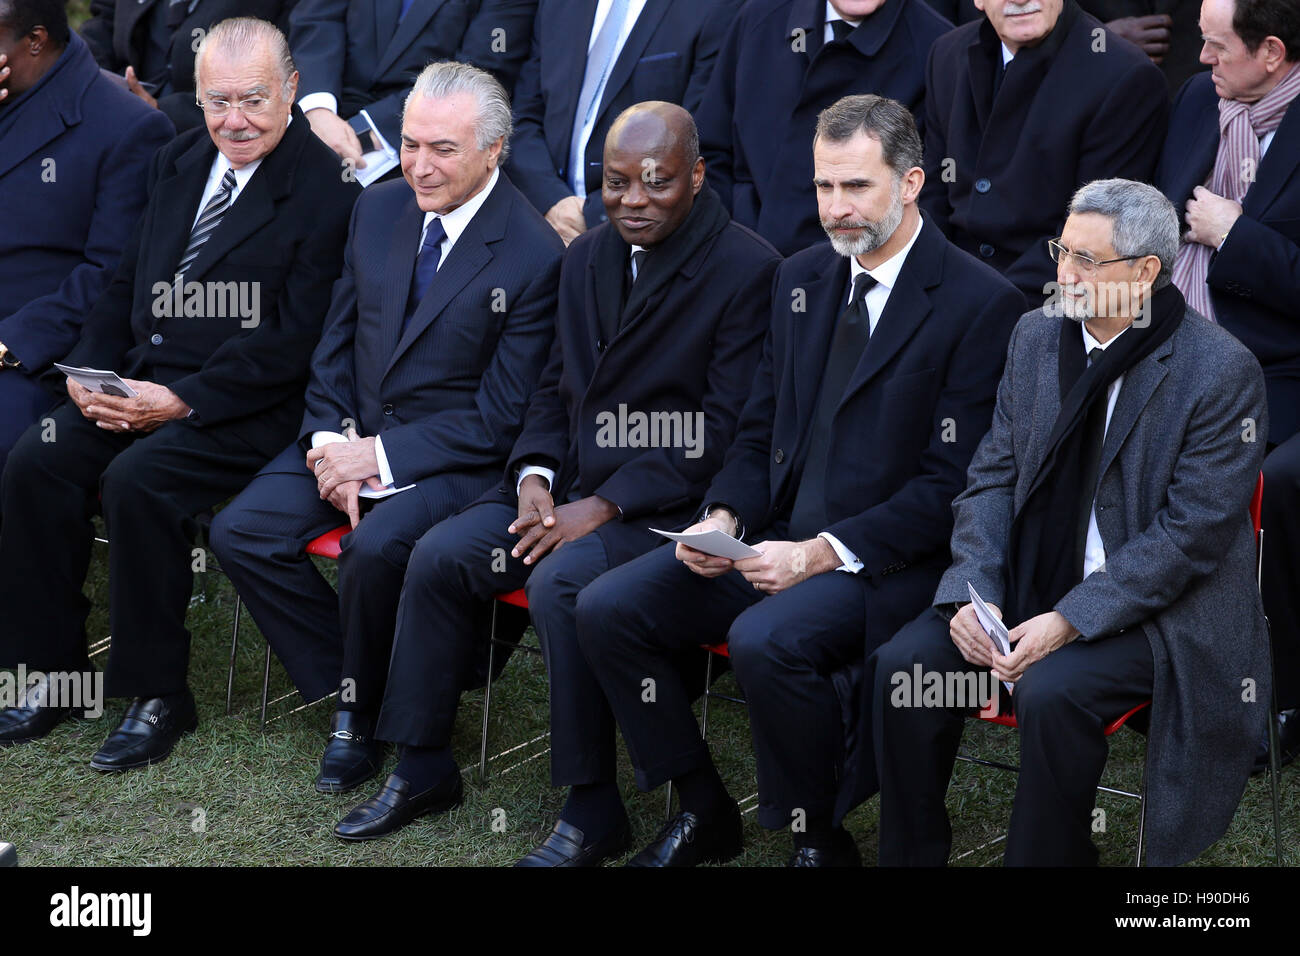 Lisbon, Portugal. 10th Jan, 2017. From L to R - Former Brazilian President Jose Sarnei, Brazilian President Michel Temer, President of Guinea Bissau Jose Mario Vaz, King Felipe VI of Spain and Cape Verde President Jorge Carlos Fonseca attend the funeral ceremony for the late former Portuguese President Mario Soares at the Jeronimos Monastery in Lisbon, on January 10, 2017.The founder of Portugal's Socialist Party, who served as president from 1986-96, died in hospital on January 7, 2017. Photo: Pedro Fiuza © Pedro Fiuza/ZUMA Wire/Alamy Live News Stock Photo